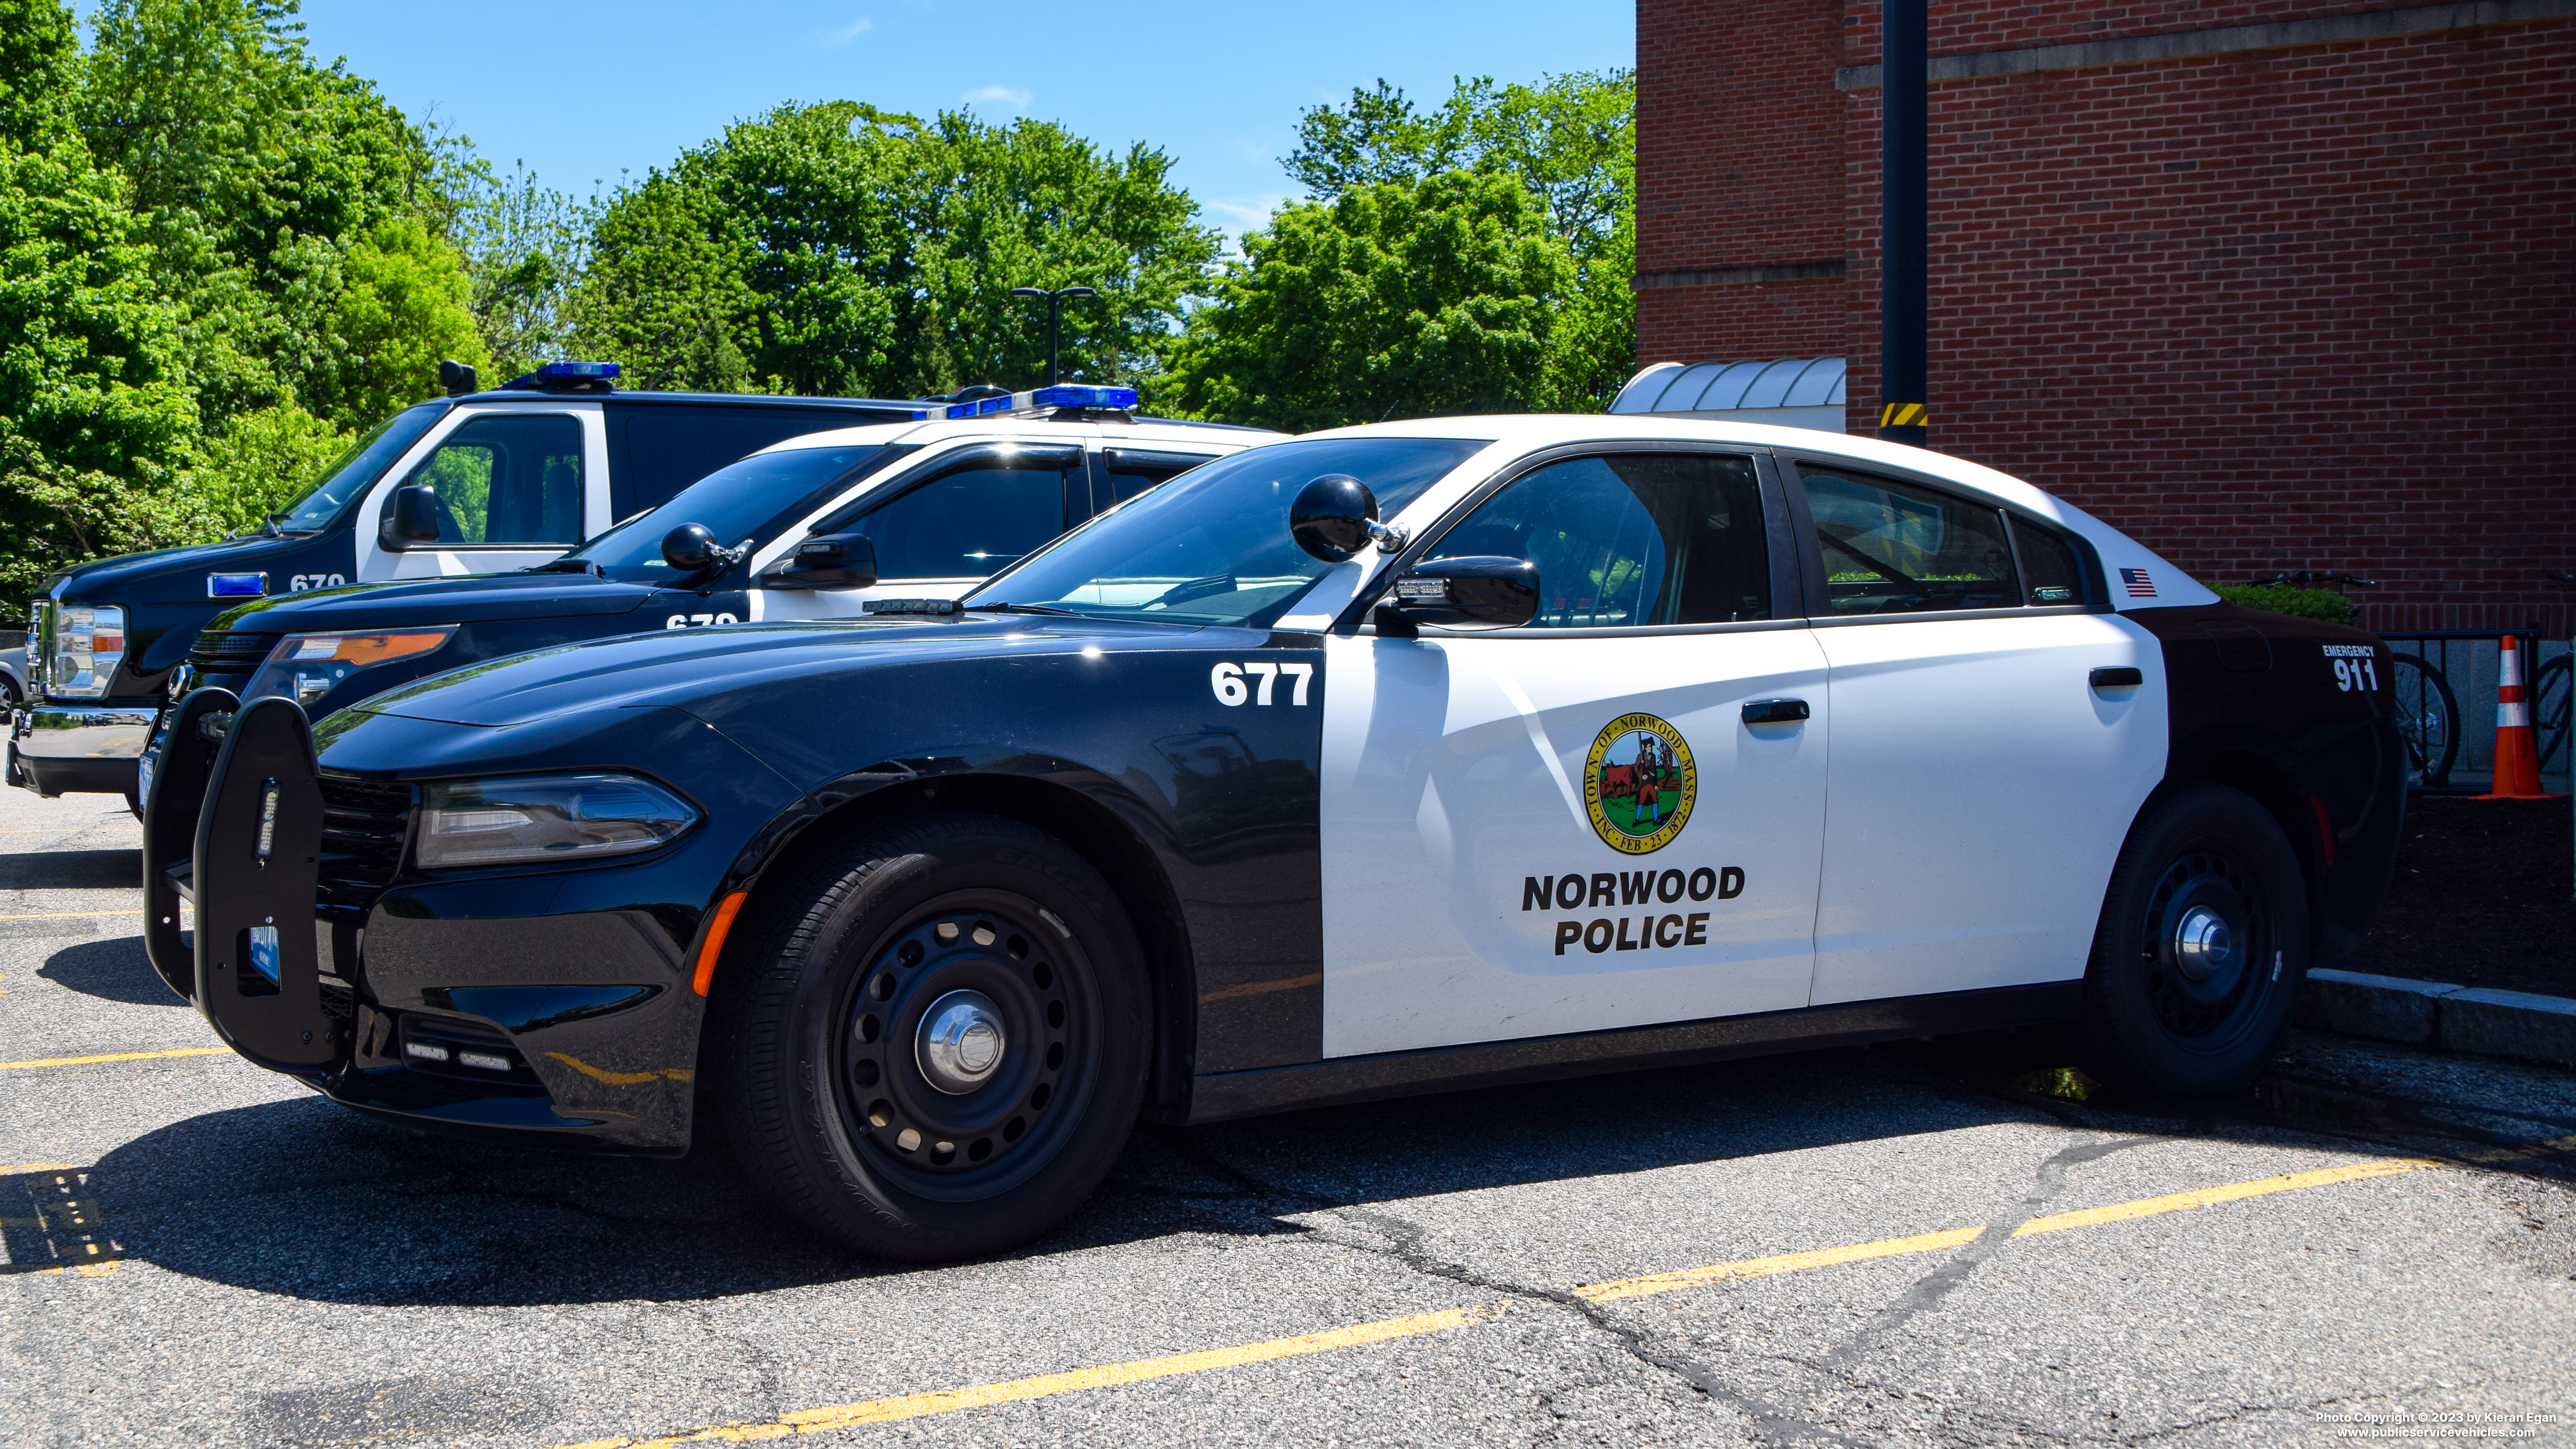 A photo  of Norwood Police
            Cruiser 677, a 2015-2019 Dodge Charger             taken by Kieran Egan